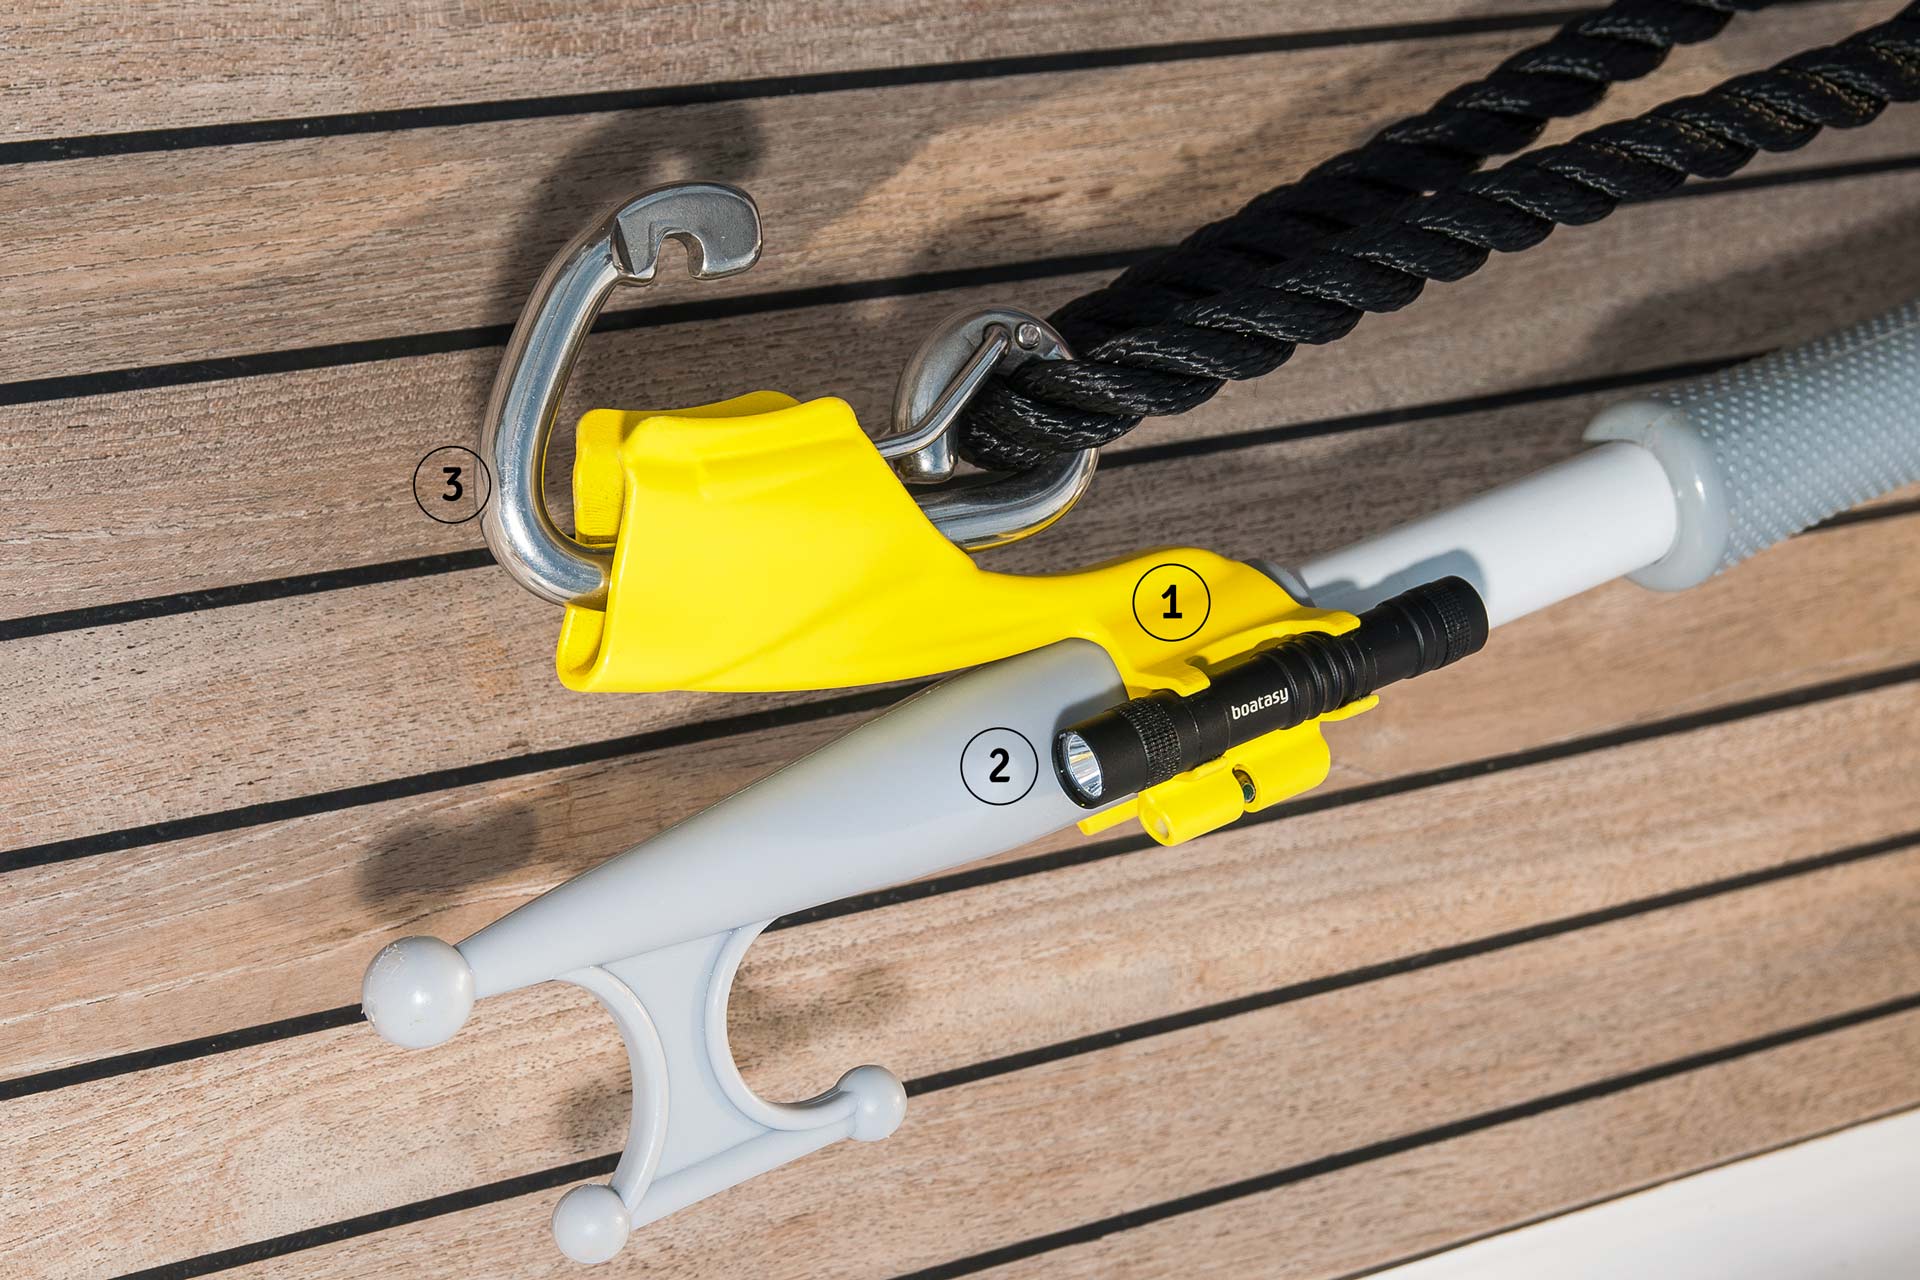 Hooklinker is all-in-one multipurpose mooring boat attachment